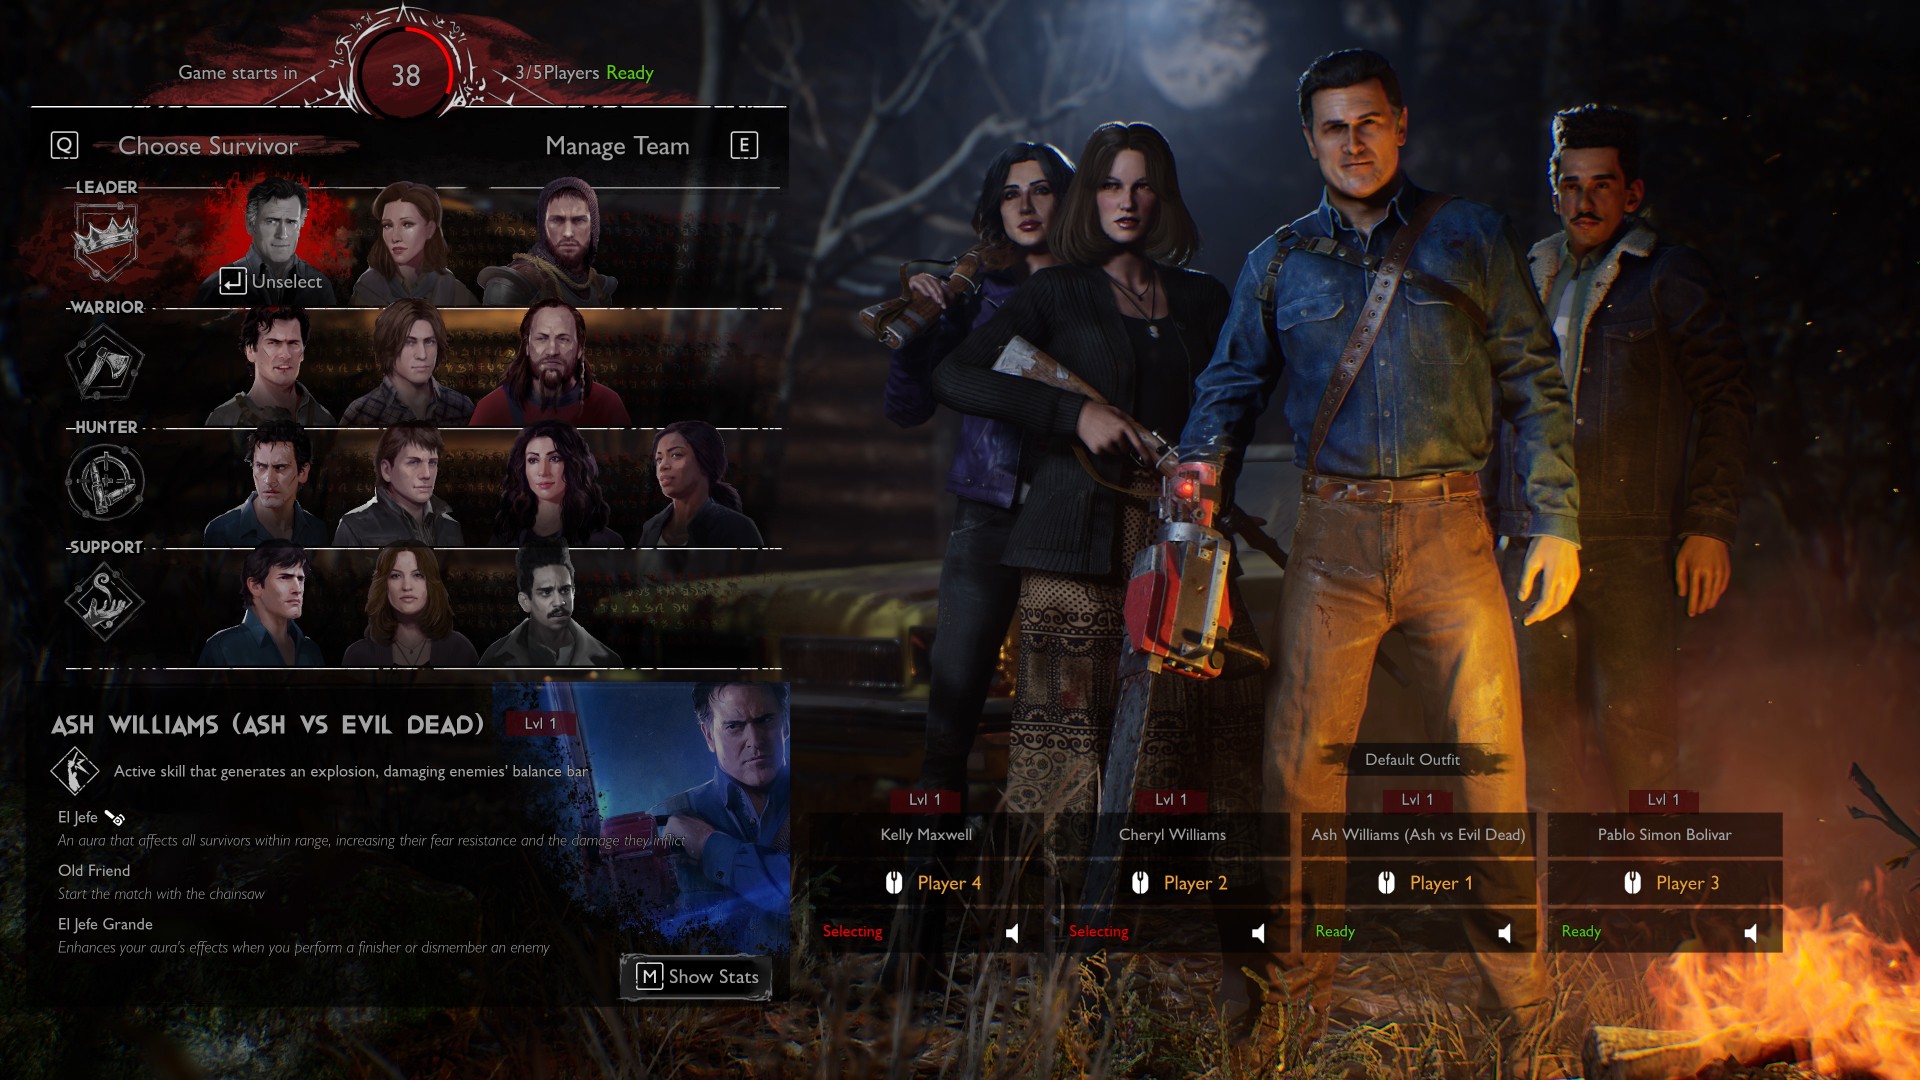 All Evil Dead game classes for survivors and demons